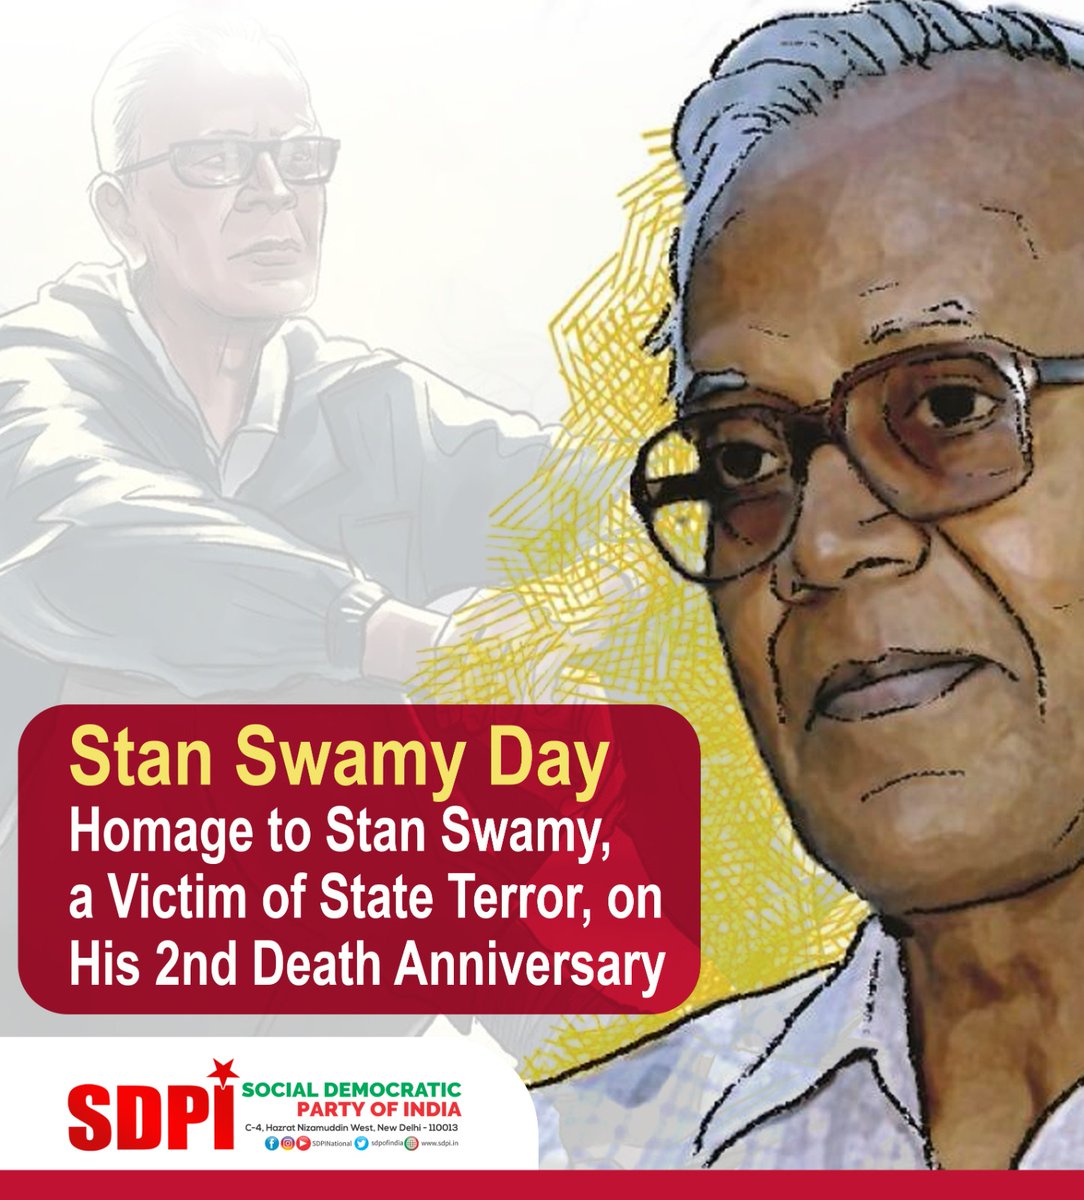 Stan Swamy Day

Homage to Stan Swamy, a Victim of State Terror, on His 2nd Death Anniversary
#StanSwamy